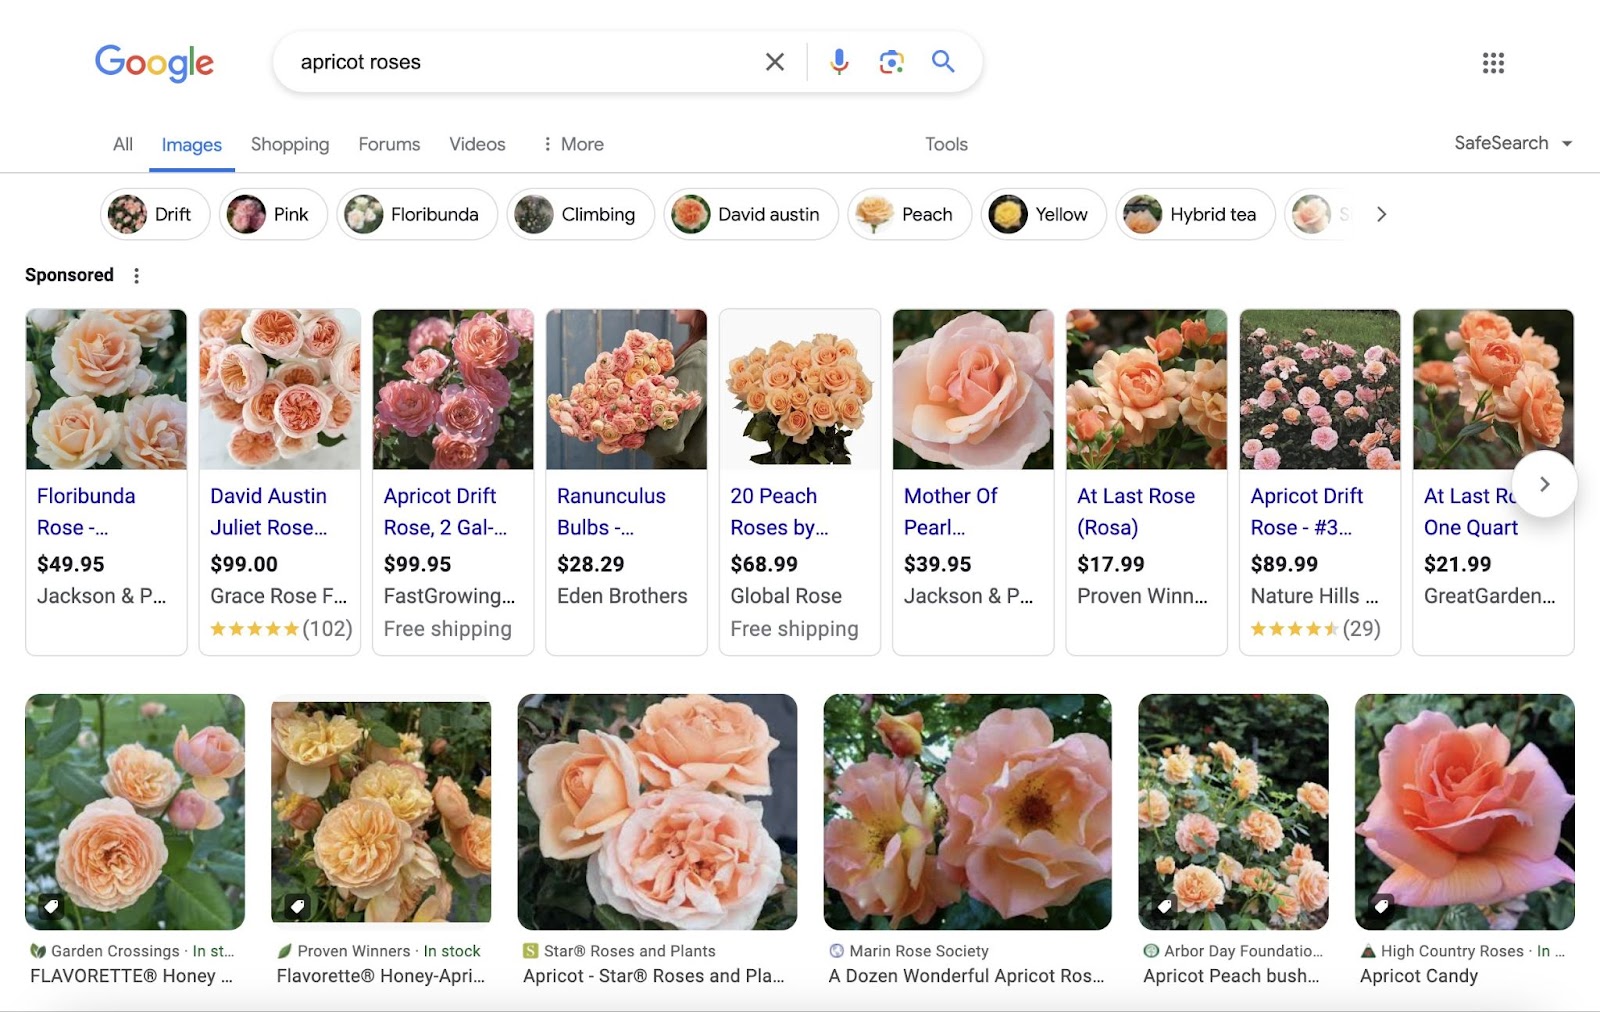 google image results for "apricot roses" shows images pulled from various sites.